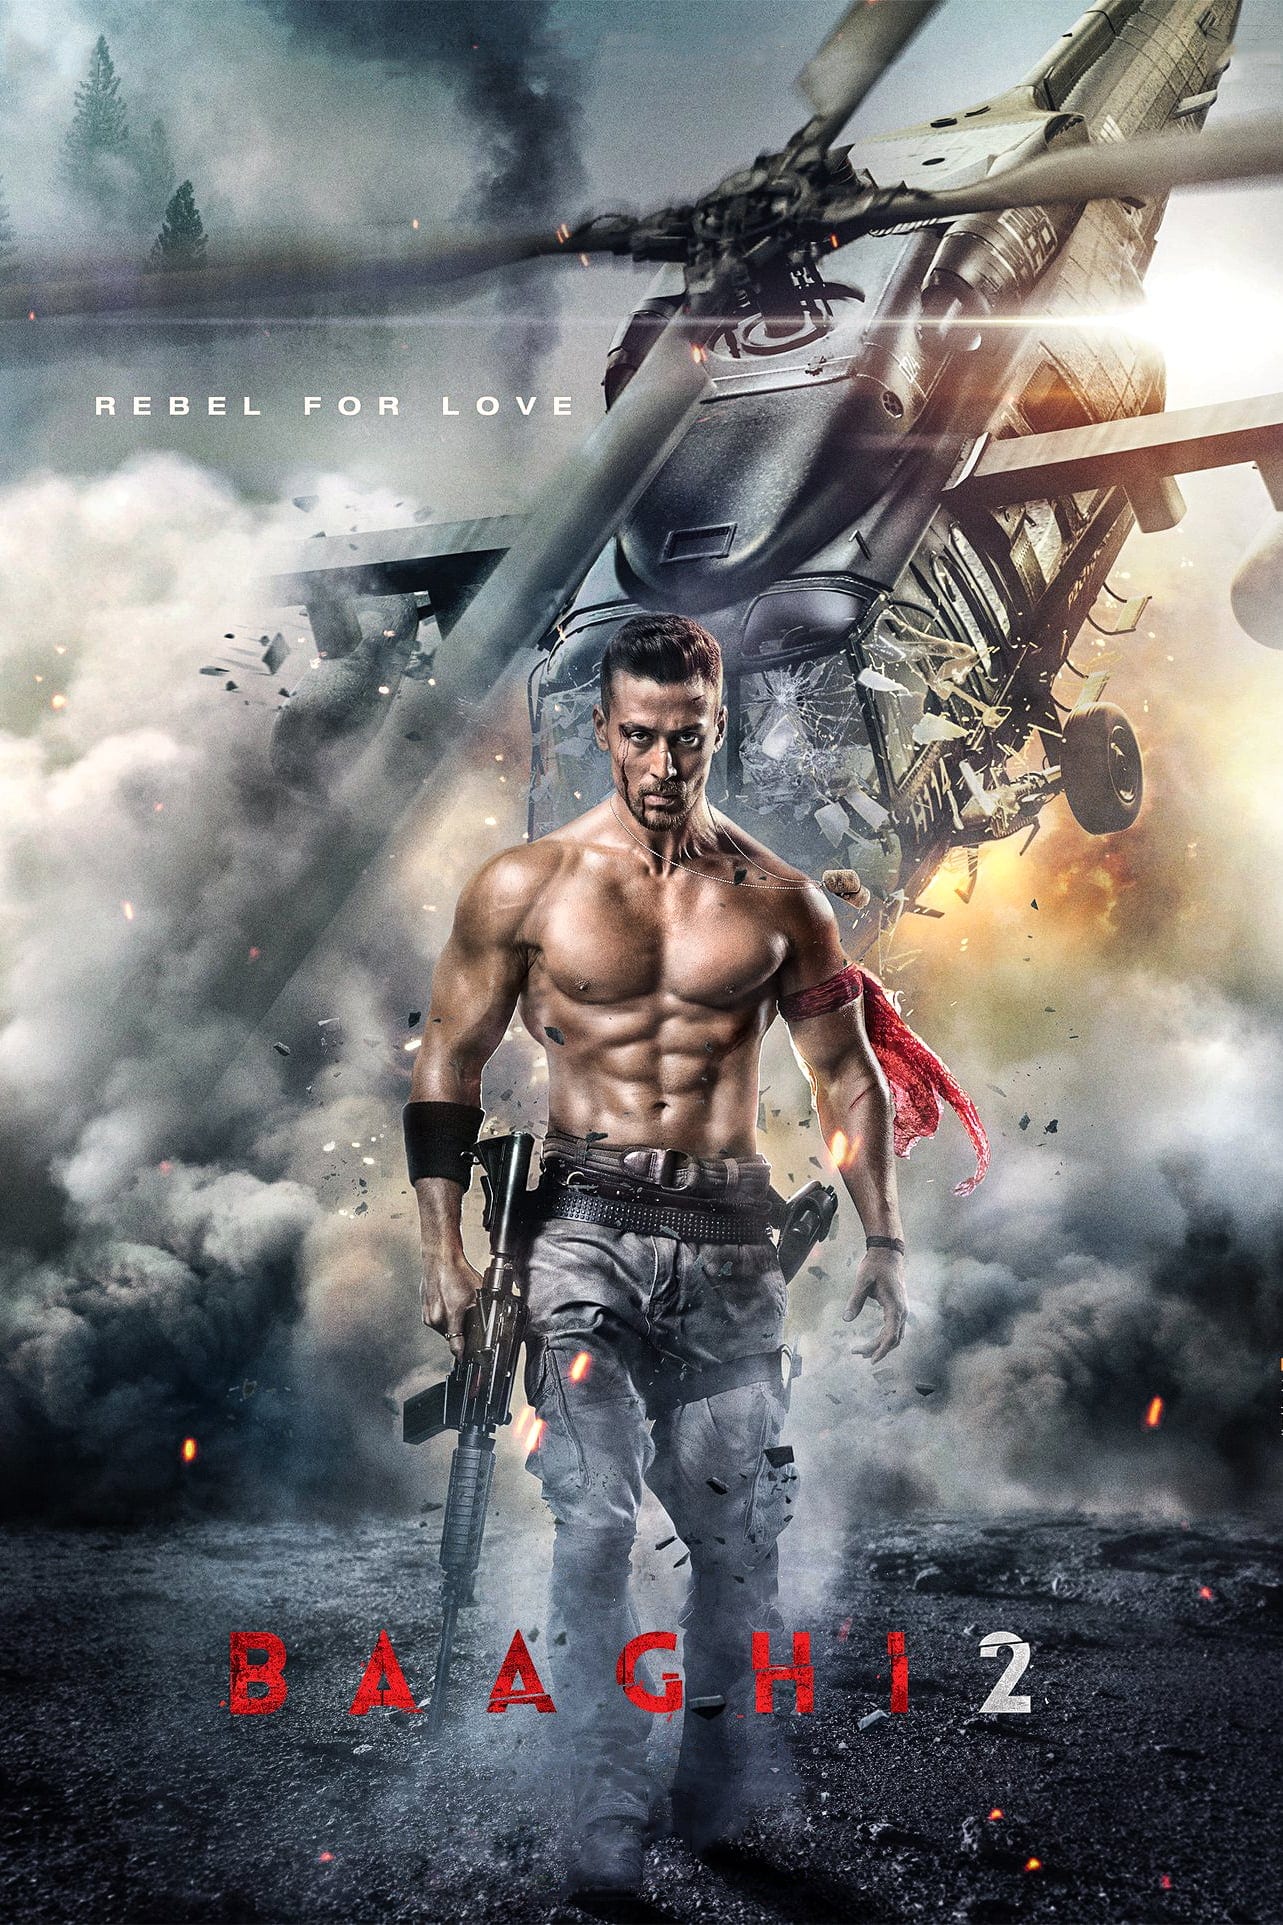 Poster for the movie "Baaghi 2"